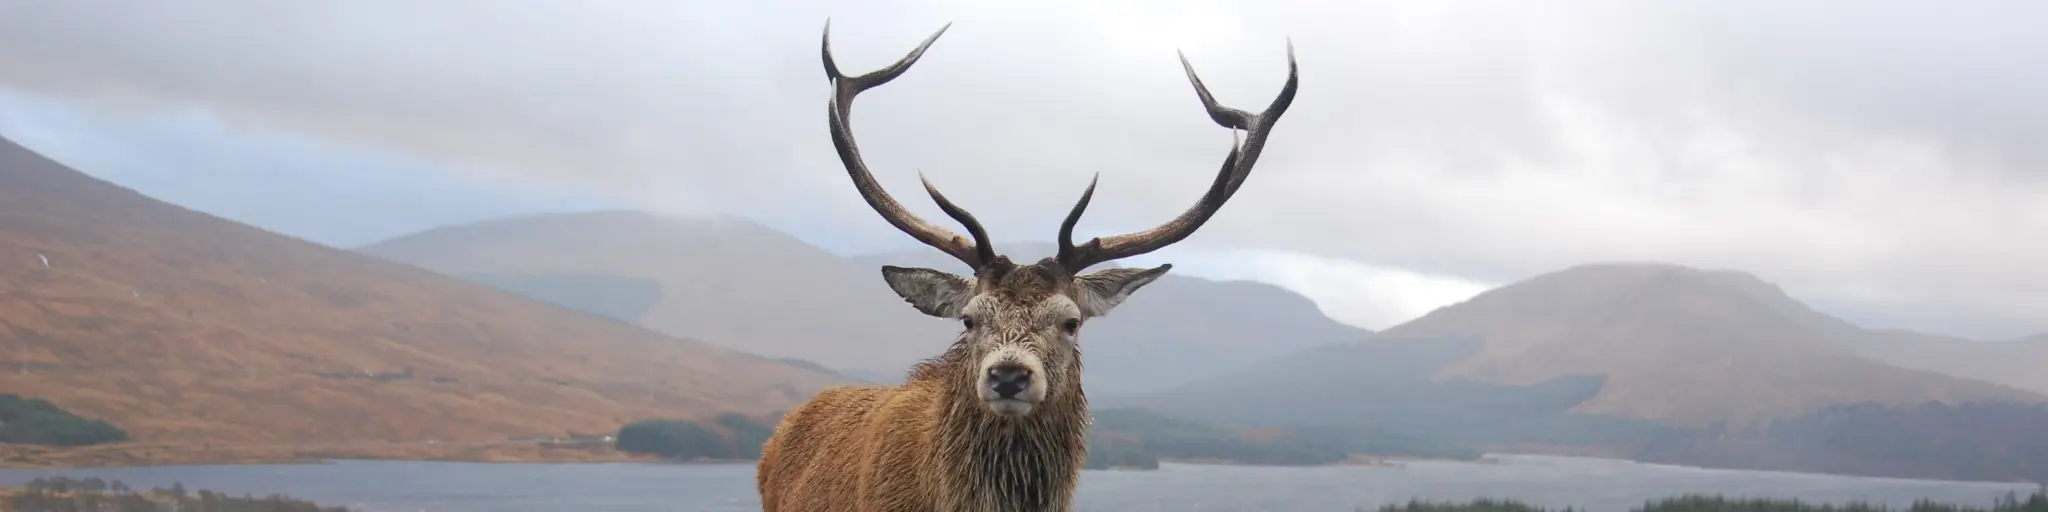 A stag stood in the middle of the road in Scotland, on a drizzly day